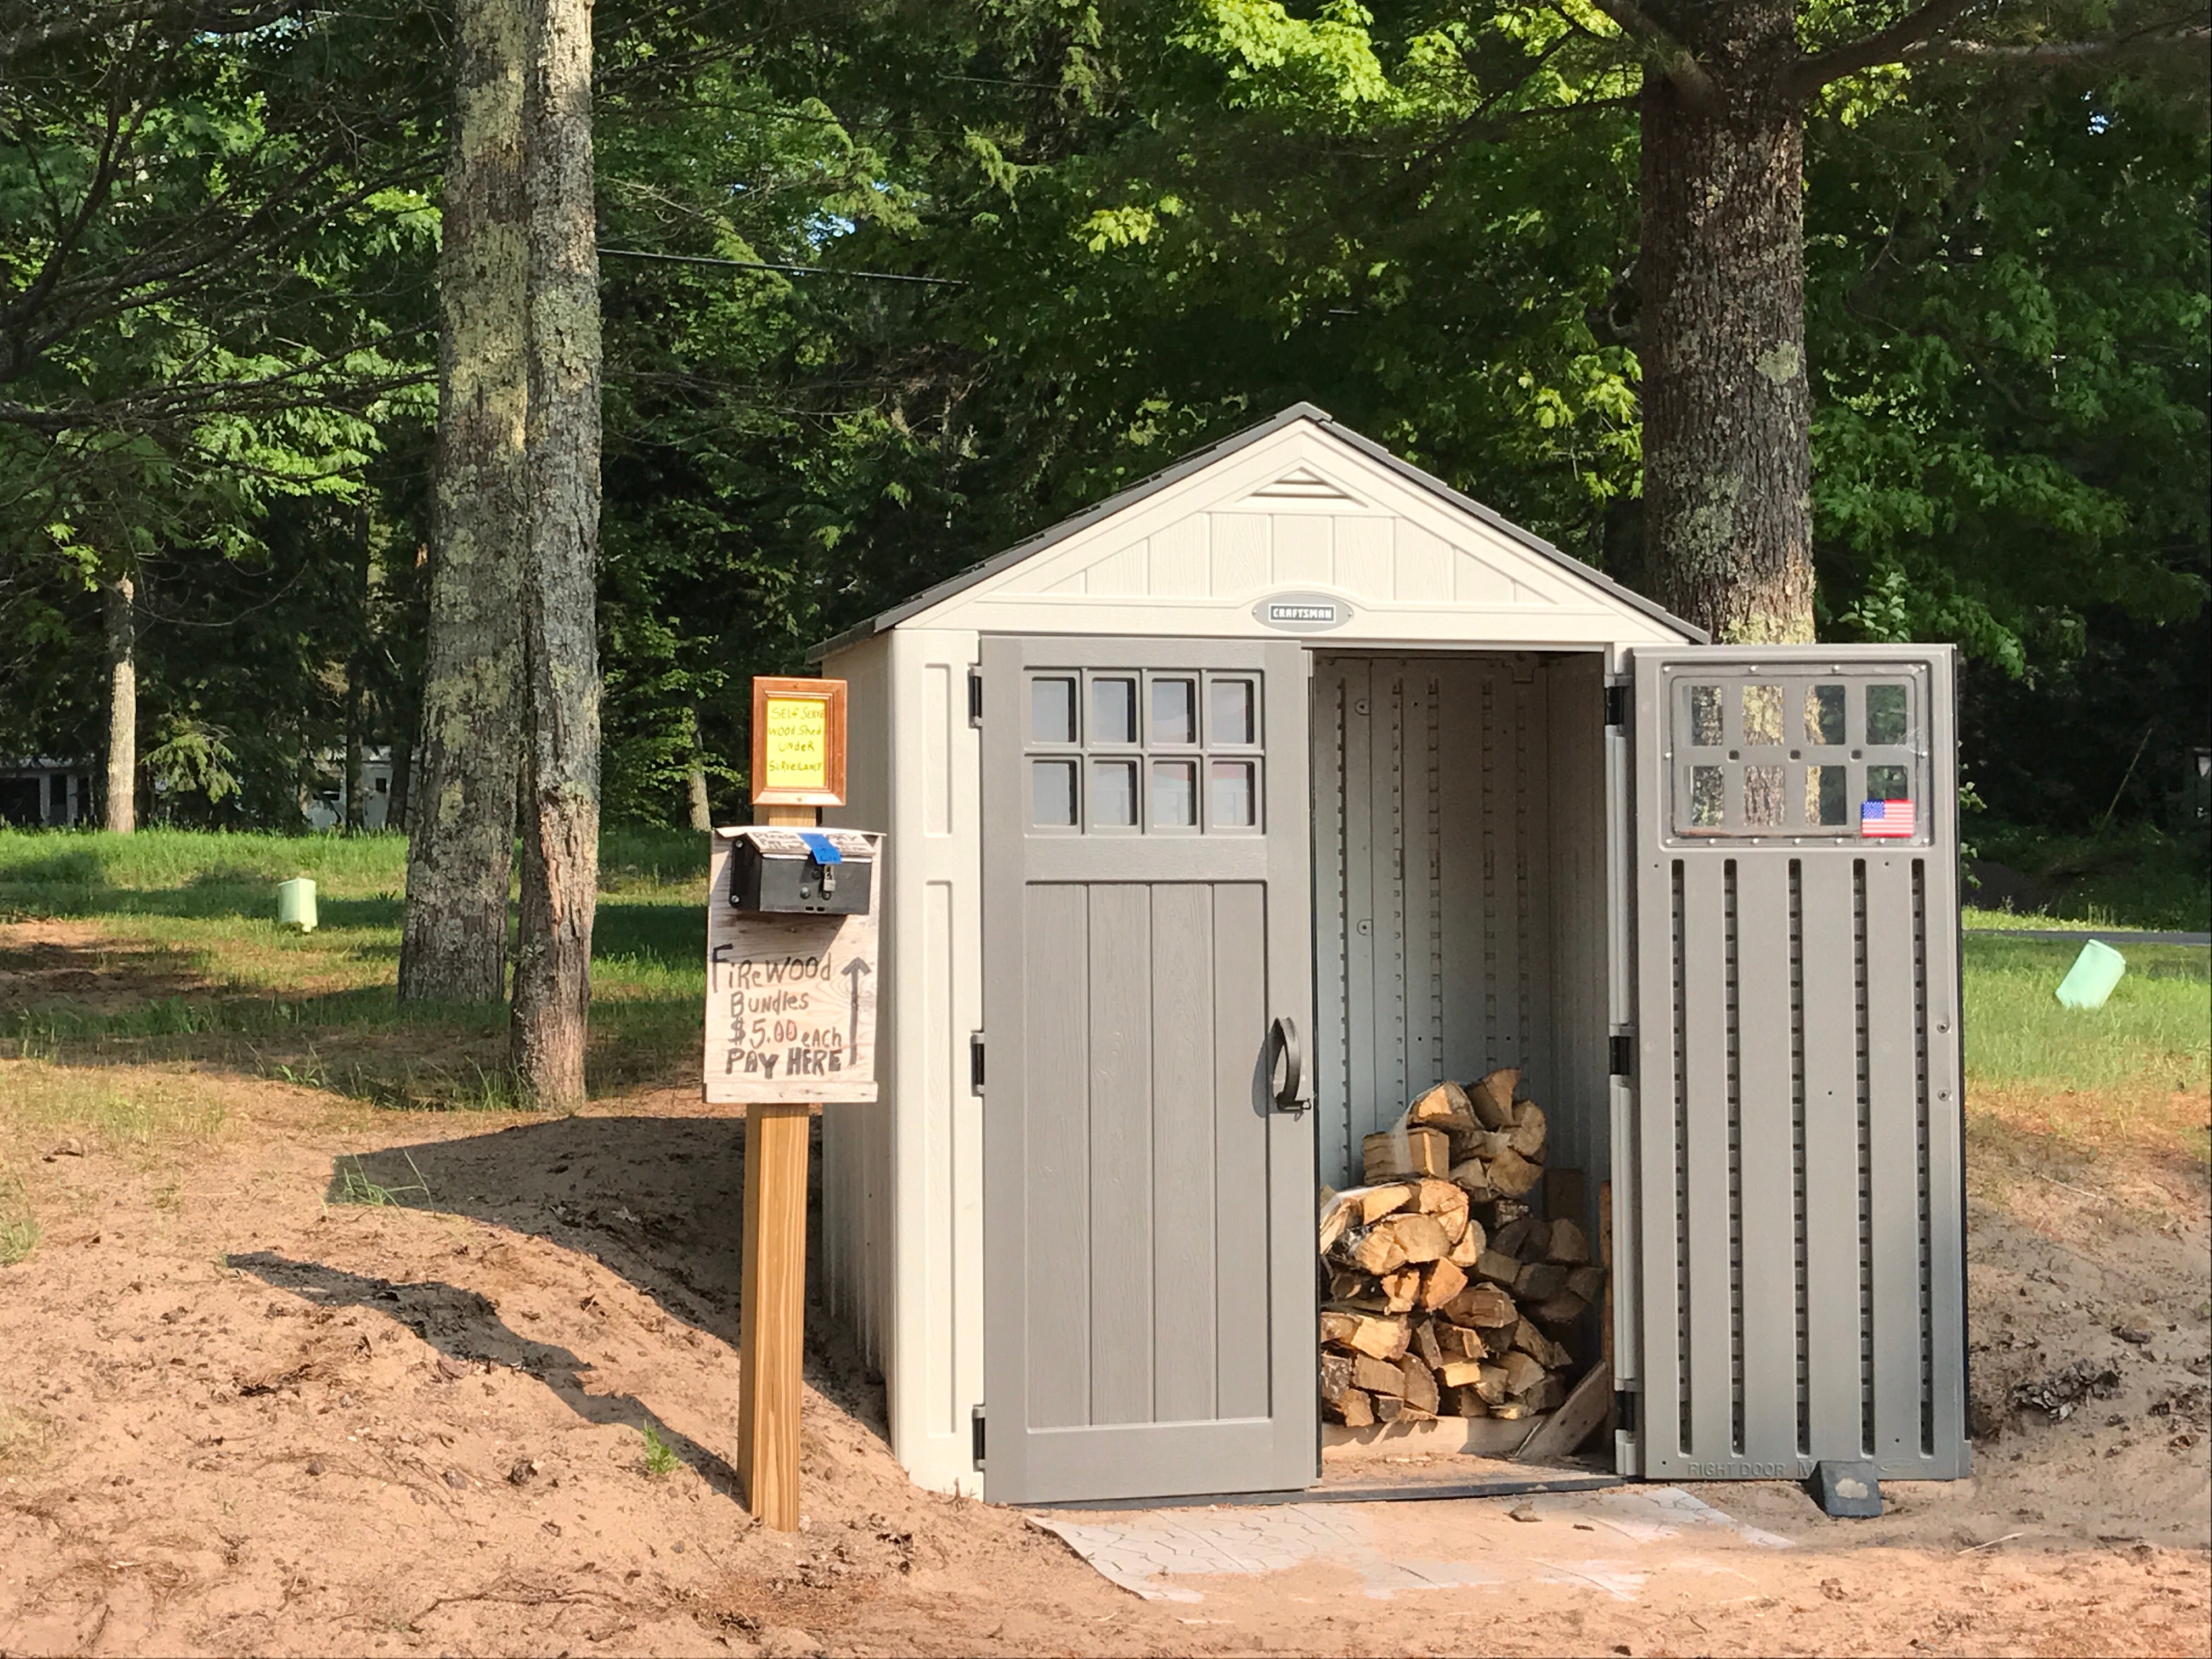 Camper submitted image from Ontonagon Township Park Campground - 5